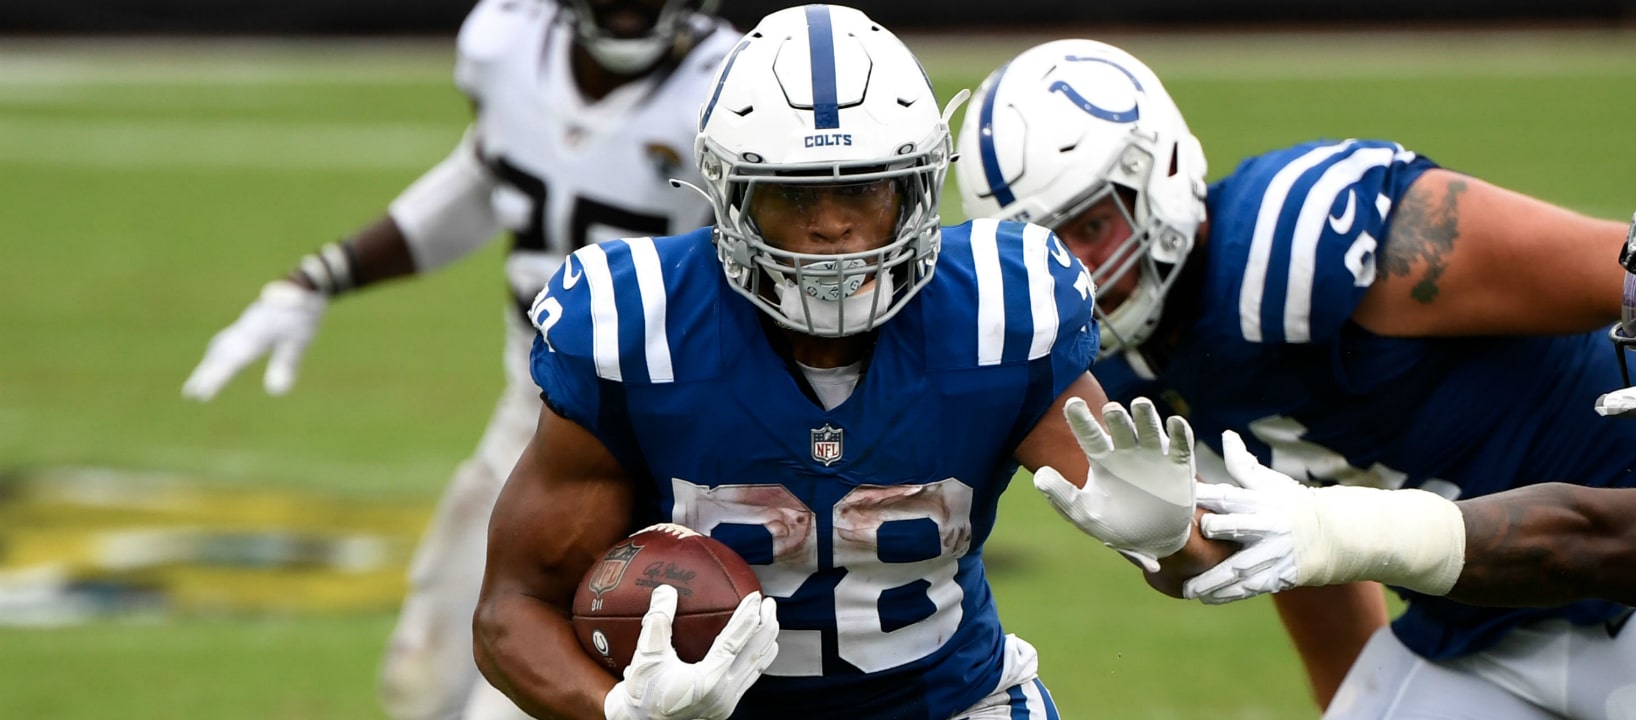 Week 16 Fantasy Football Rankings From the Most Accurate Experts (2021